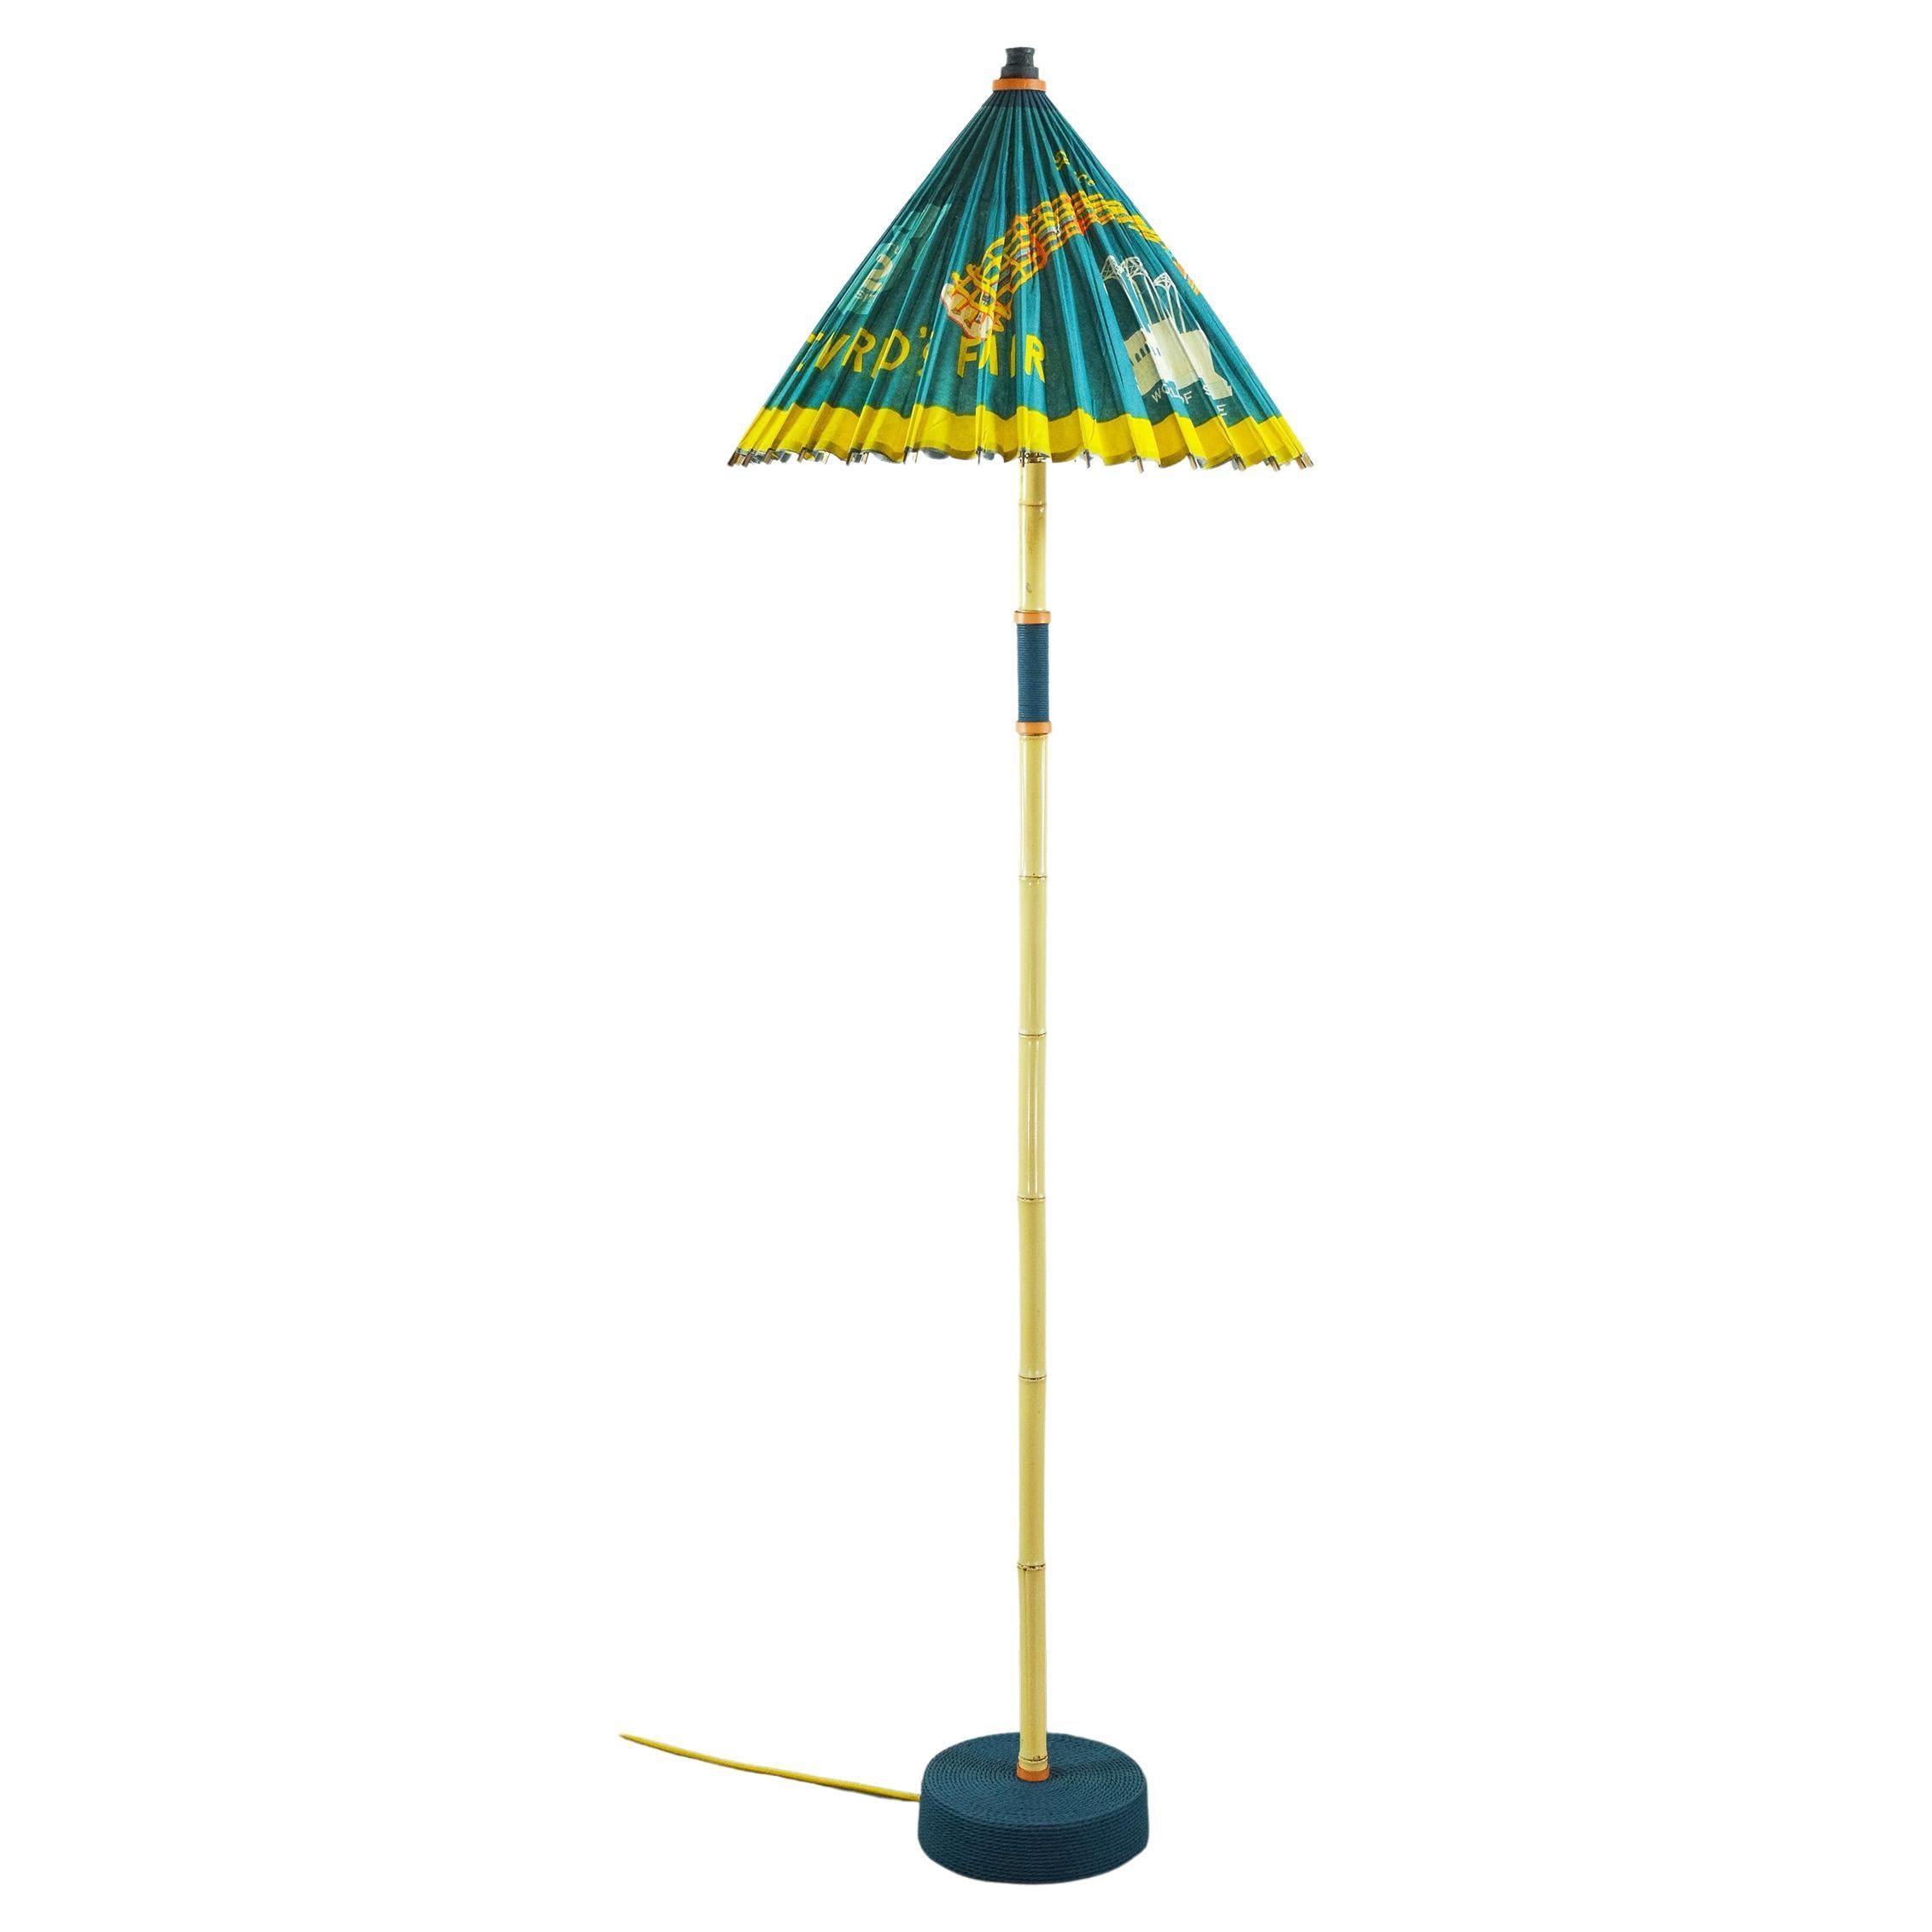 Seattle 'World's Fair' Bamboo Lamp with Parasol Shade by Christopher Tennant For Sale